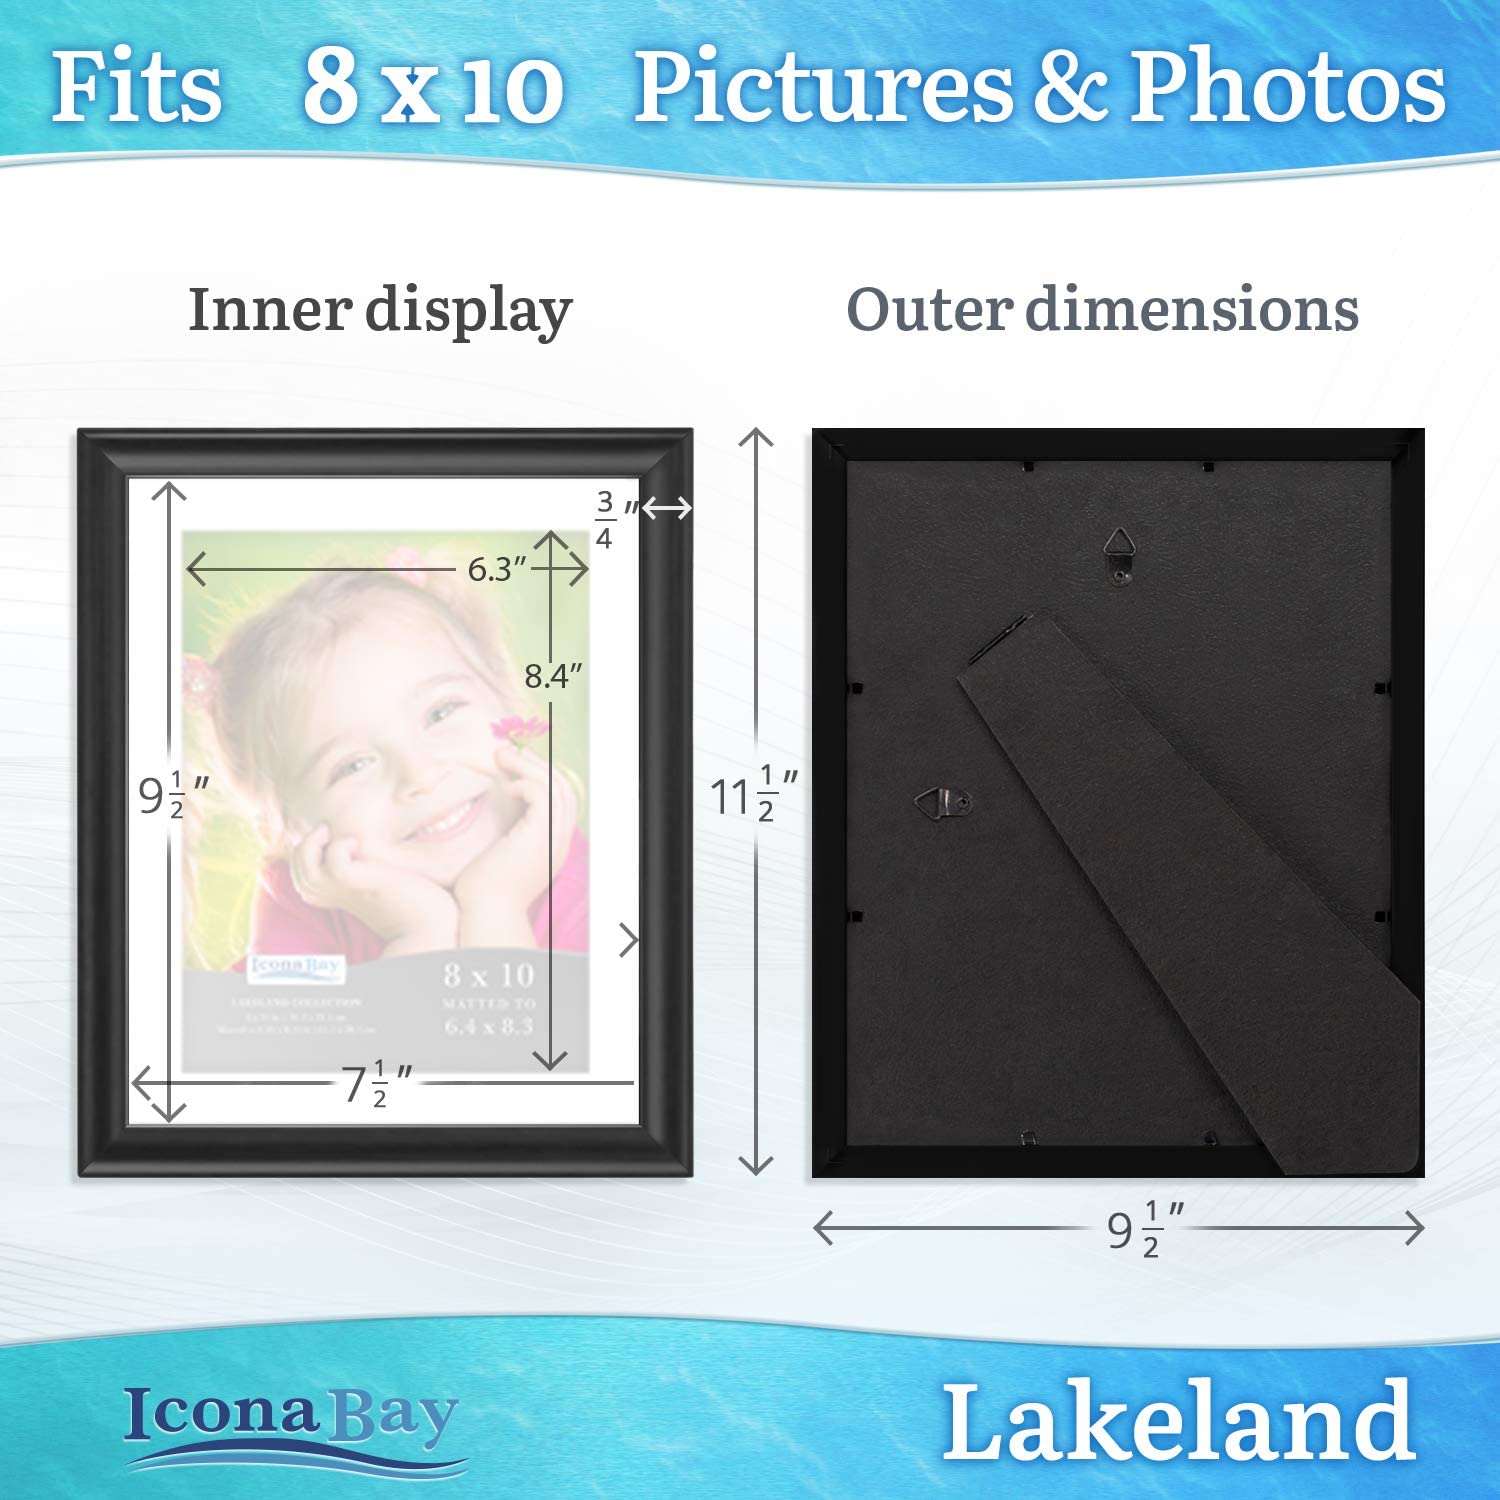 Icona Bay 8x10 Black Picture Frame - e4cents